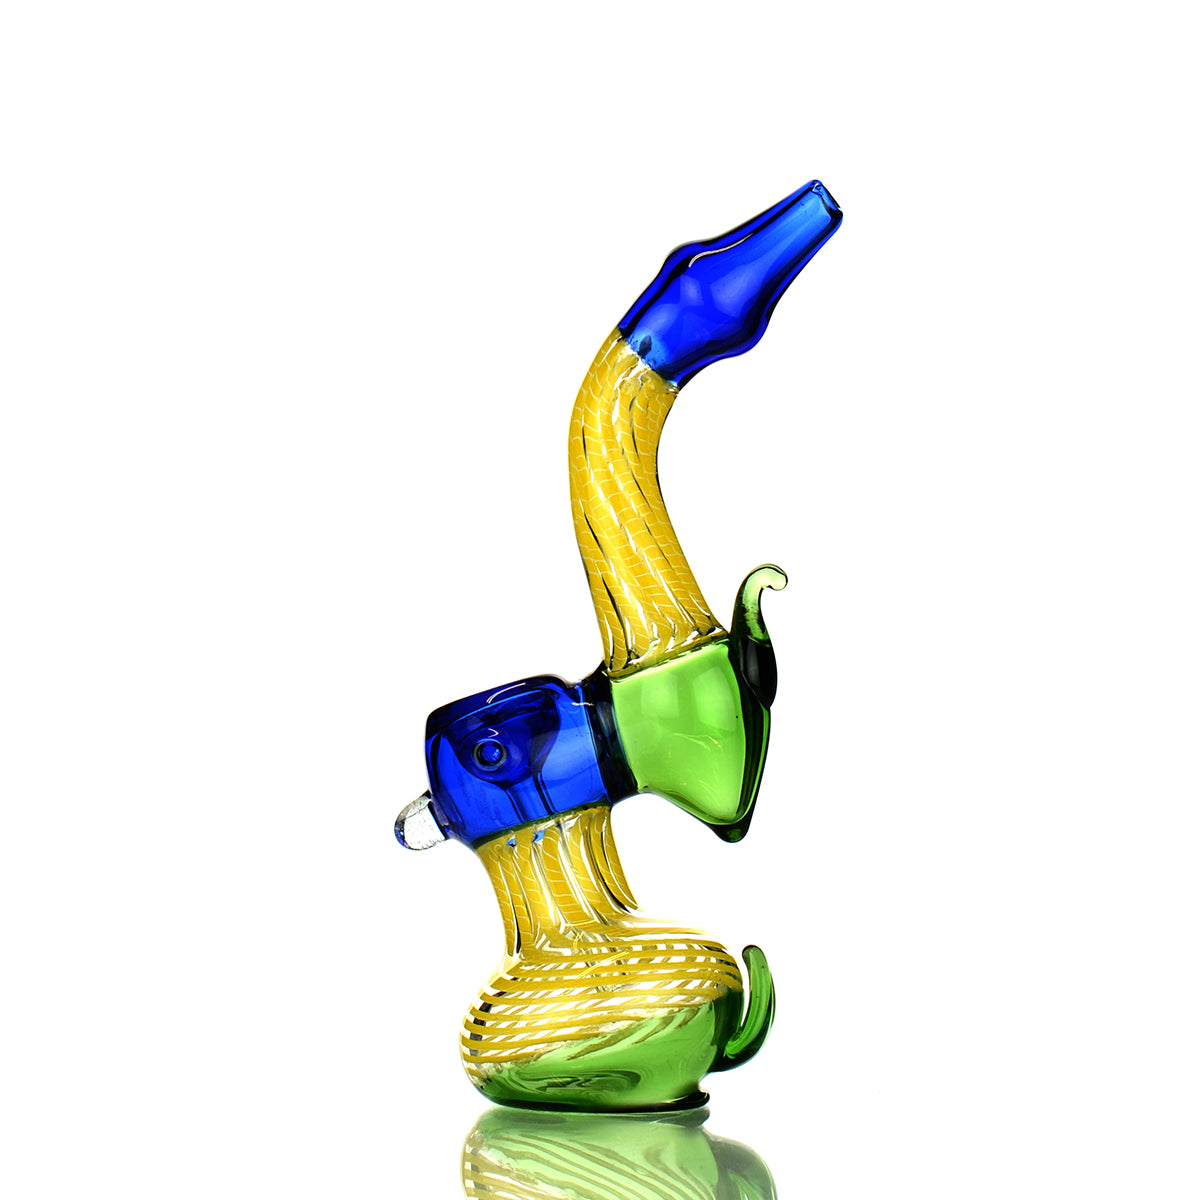 7" Bubbler Twisting Design with Horns